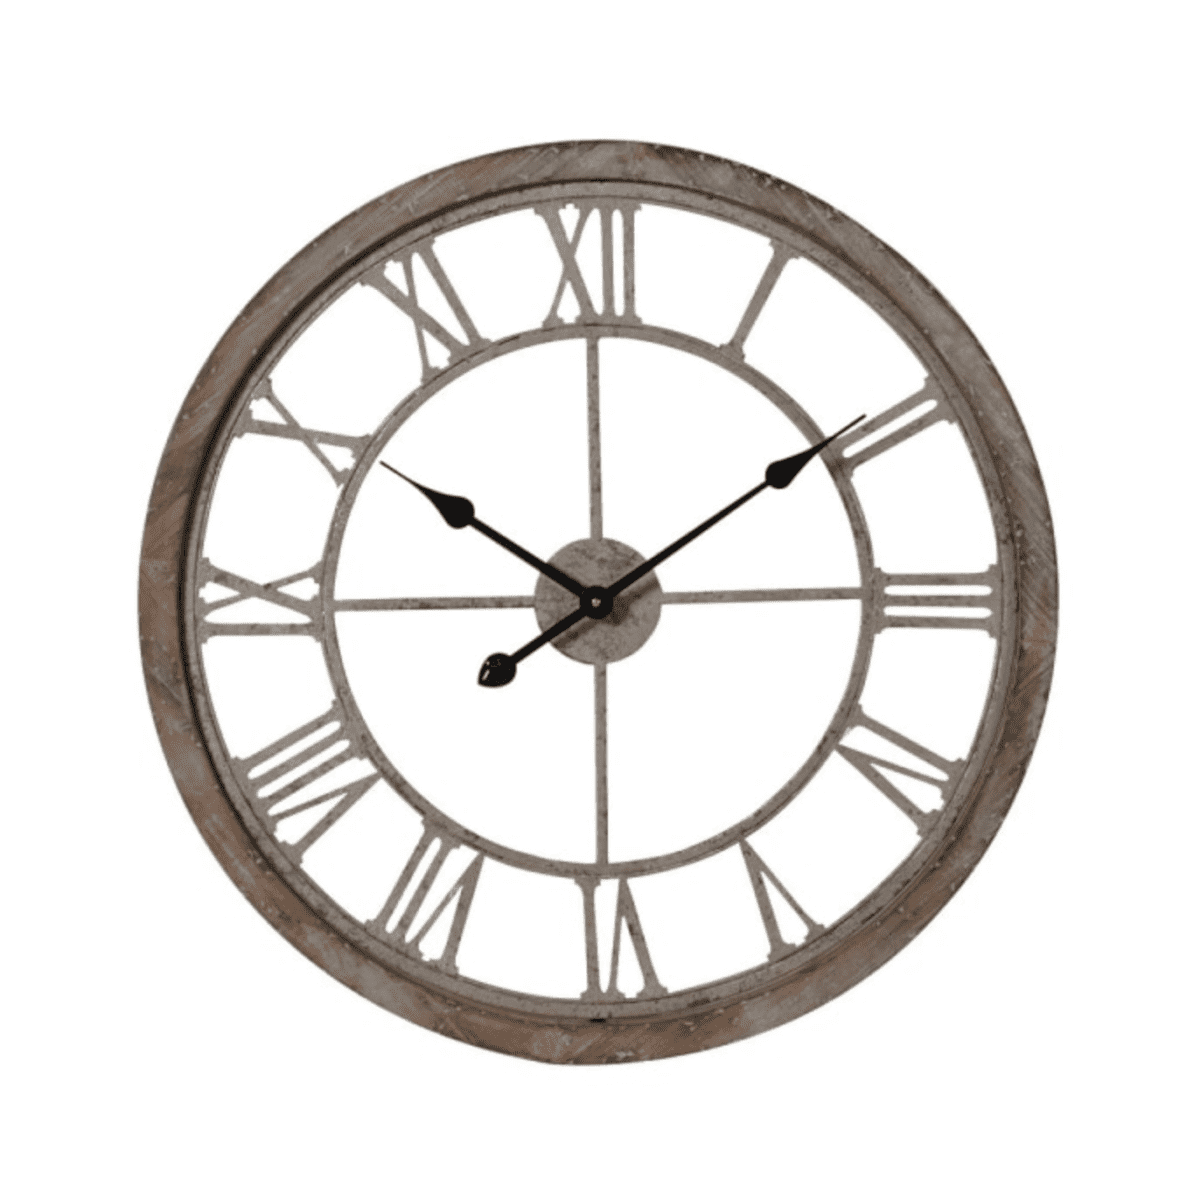 White washed wooden wall clock with iron hands.